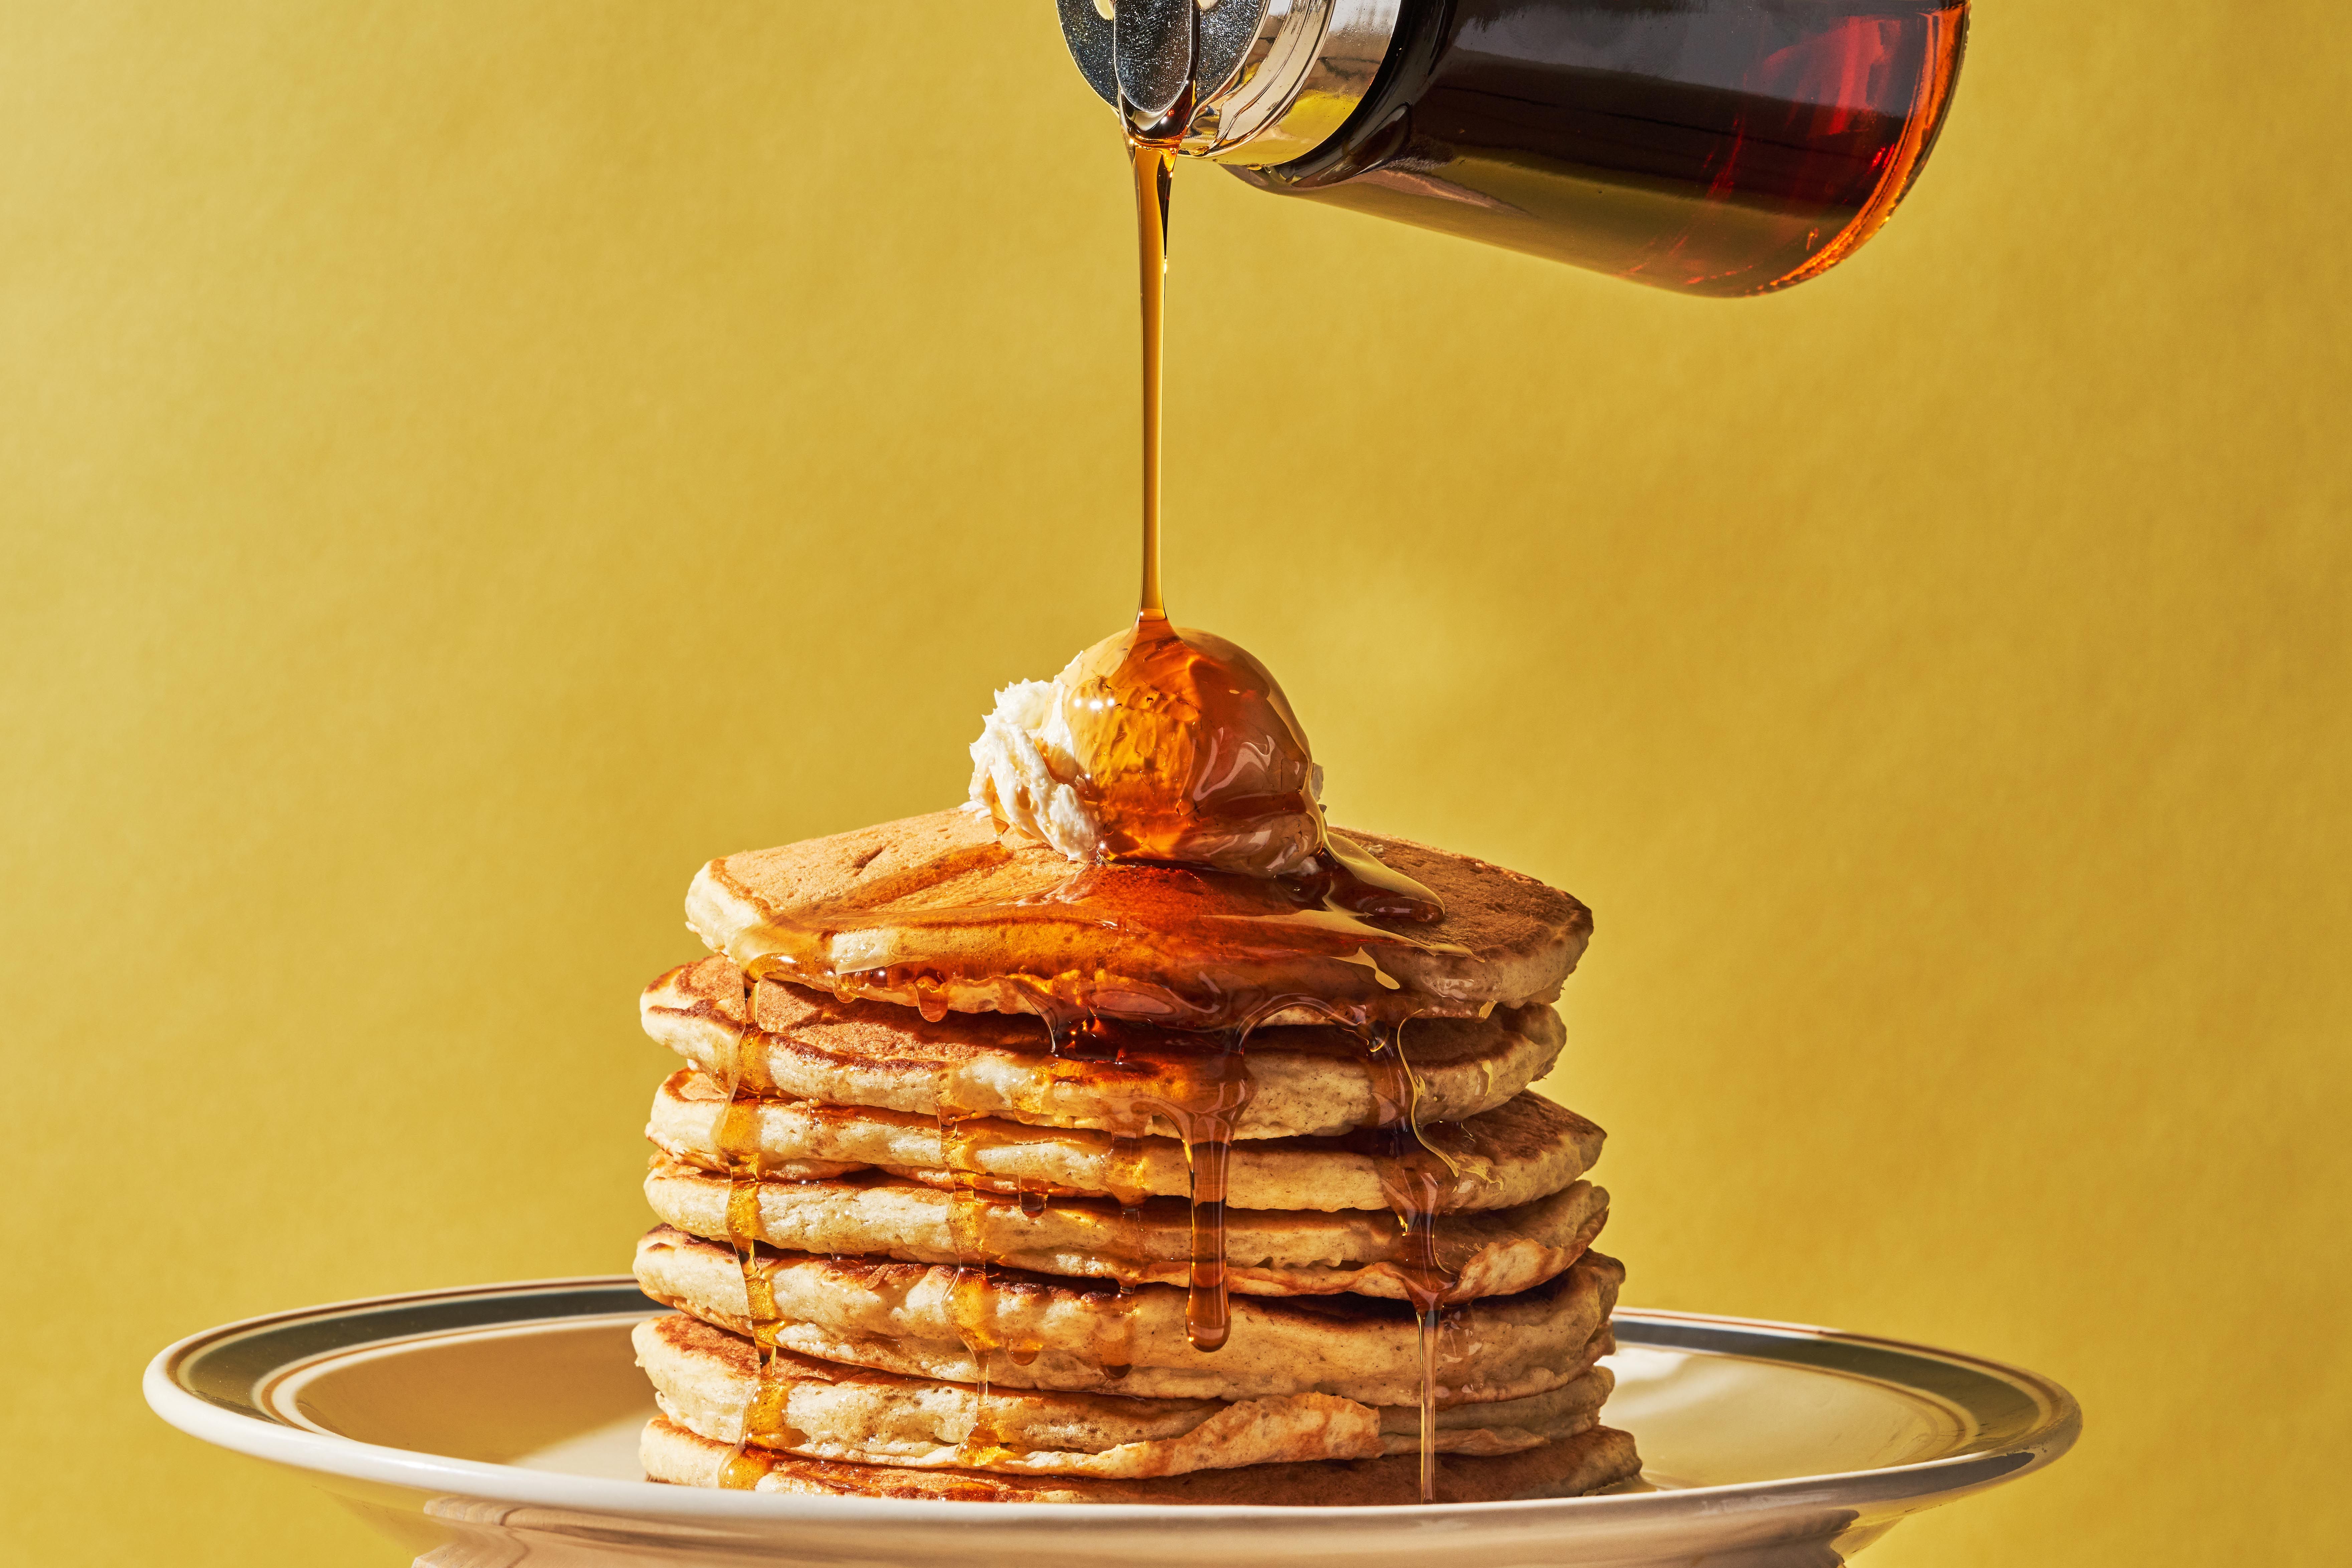 IHOP Is Giving Away Free Pancakes On February 28